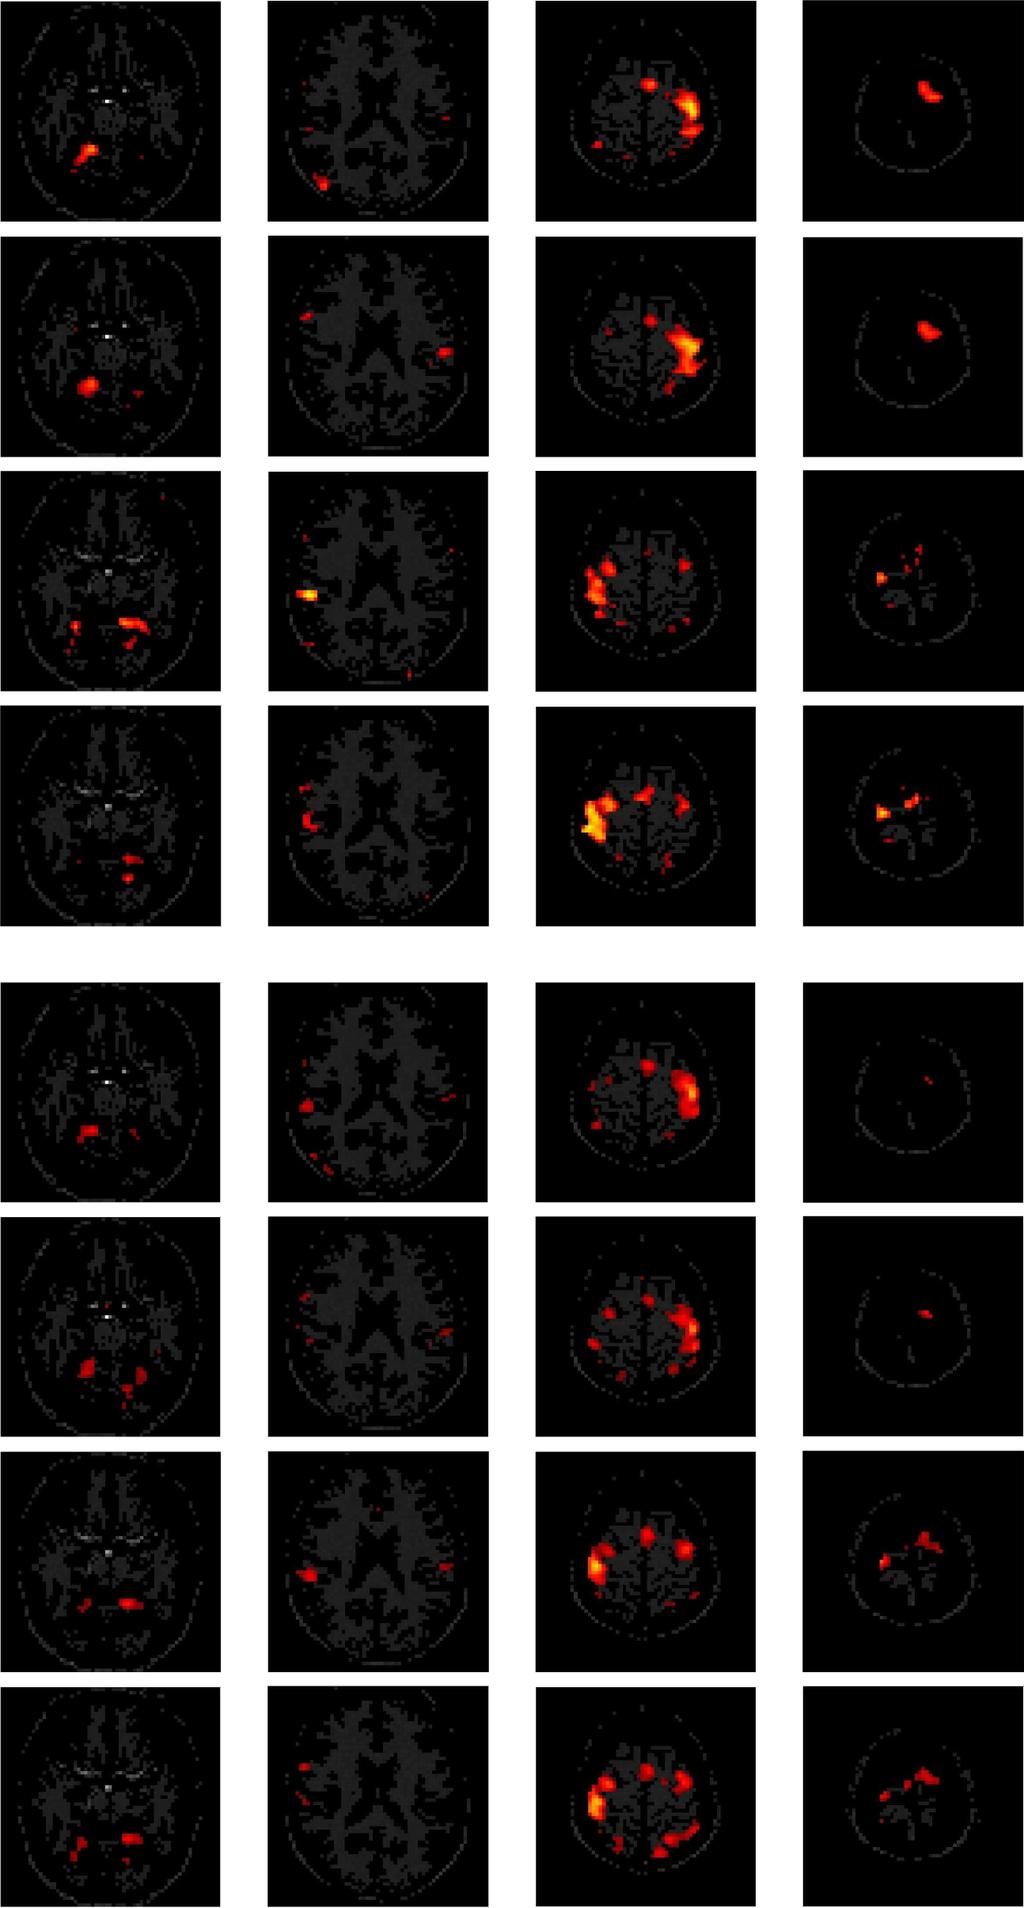 Figure 6 Brain regions activated by the four finger movements detected by two methods Panel (I): Adaptive SPM, EG right-hand (first row), IG right-hand (second row), EG left-hand (third row) and IG